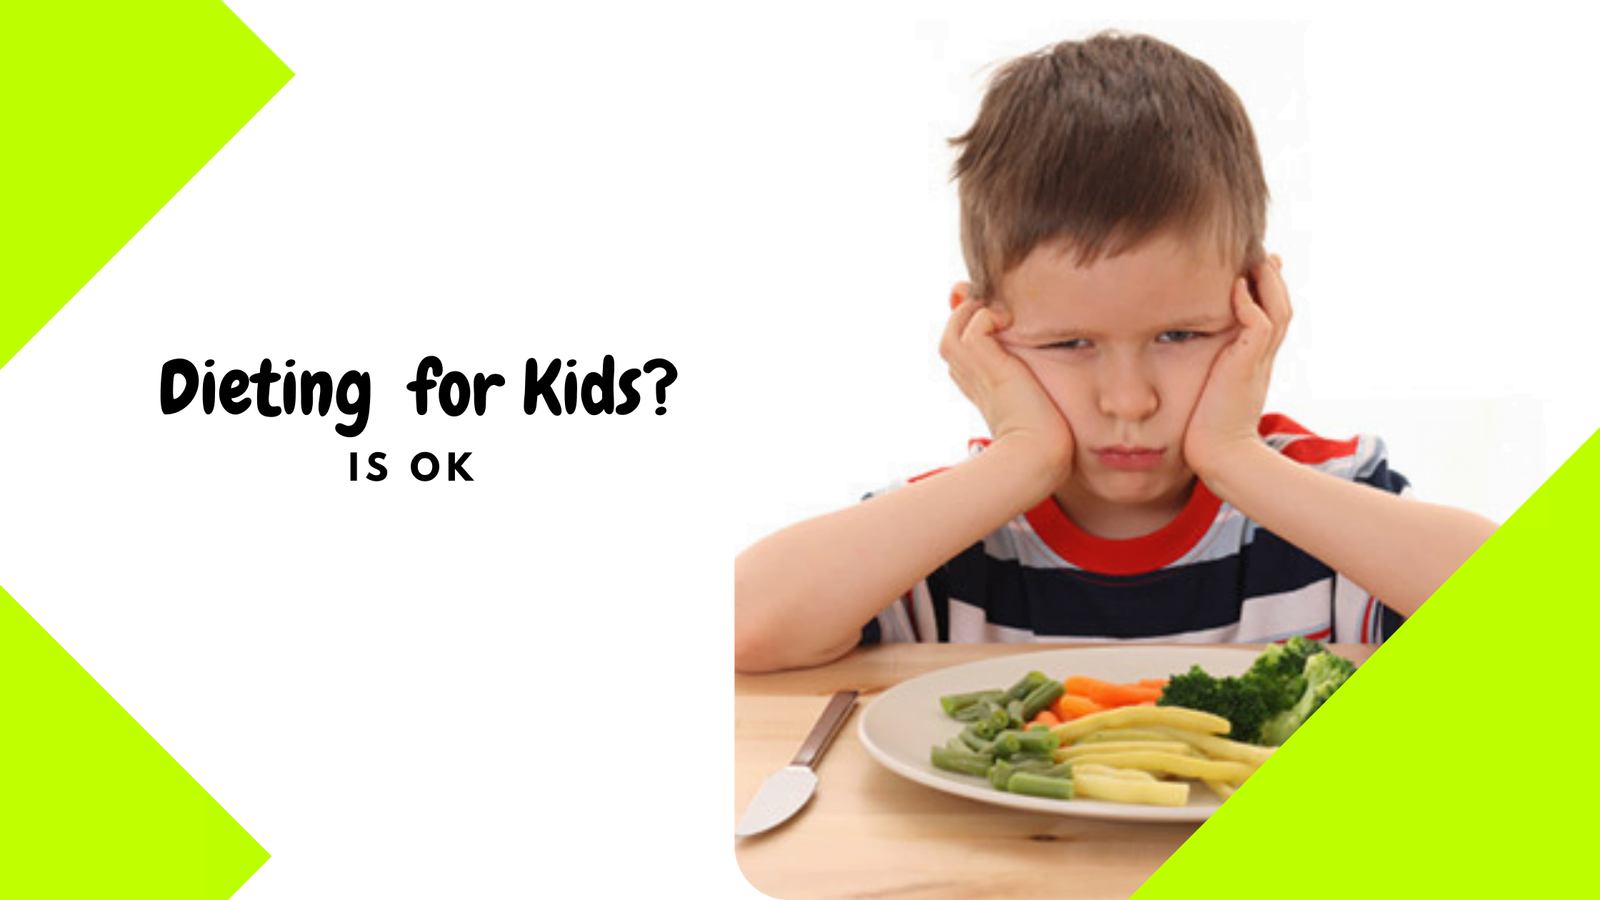 Dieting OK for Kids